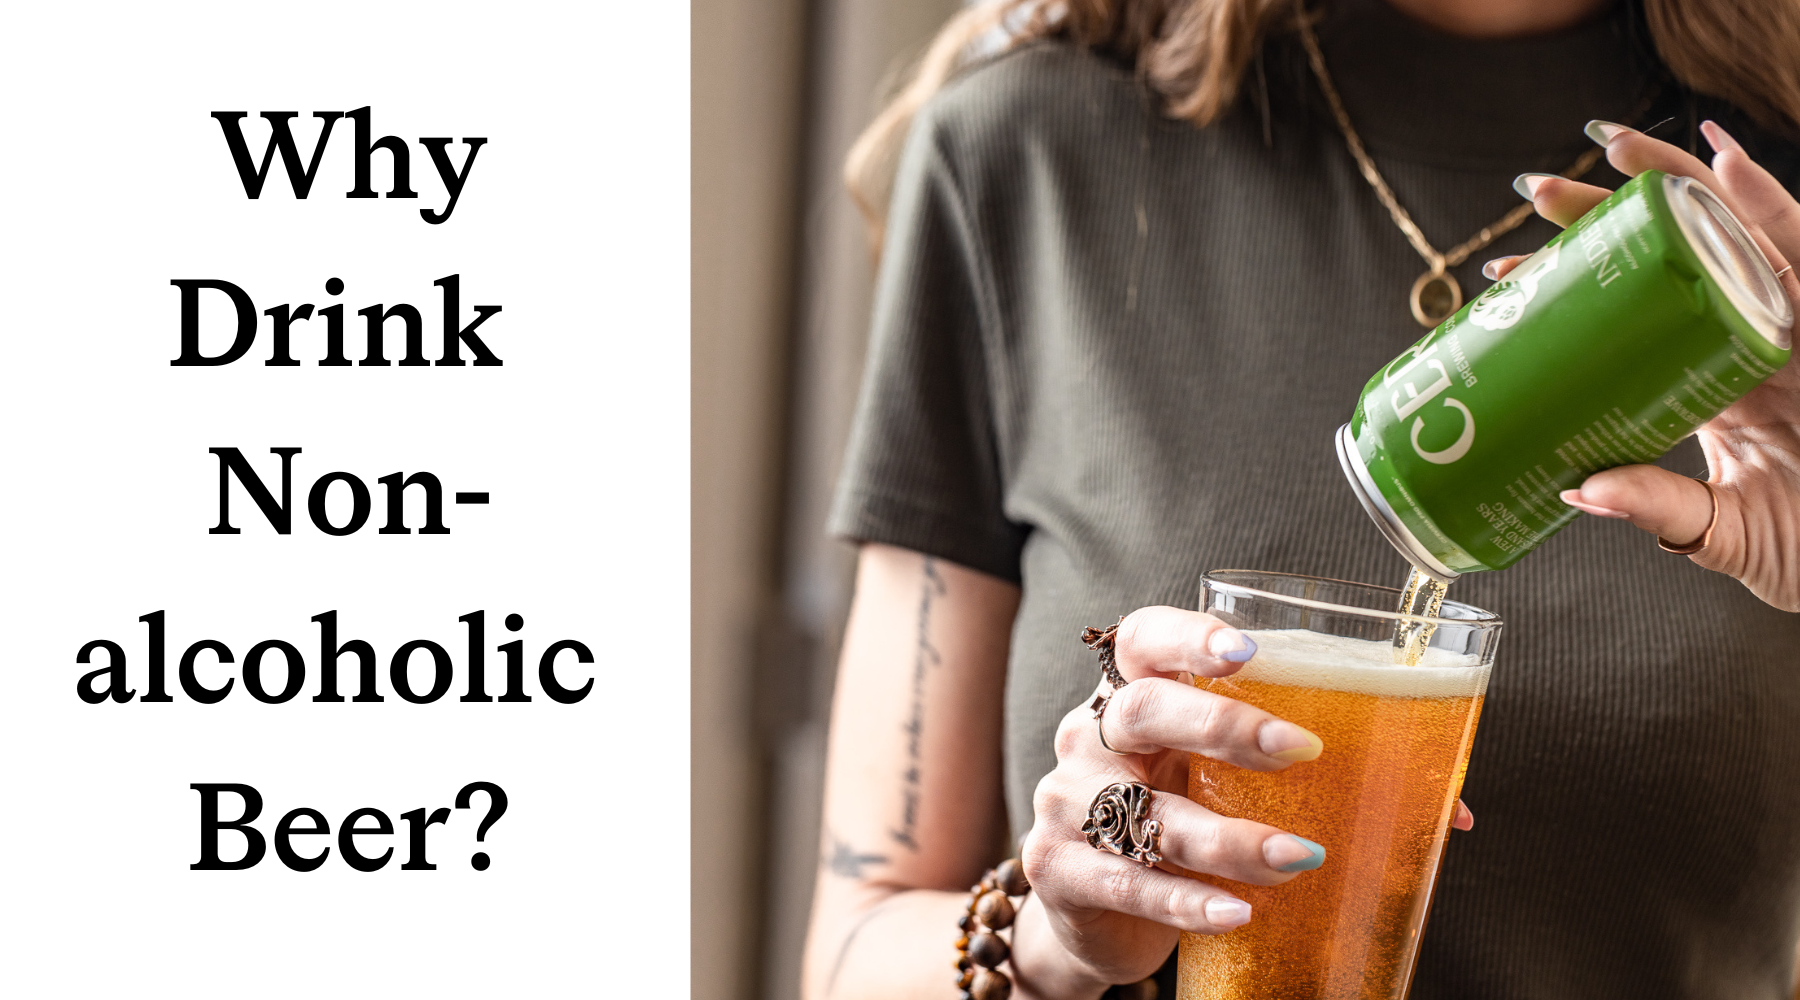 Why Drink Non-Alcoholic Beer?